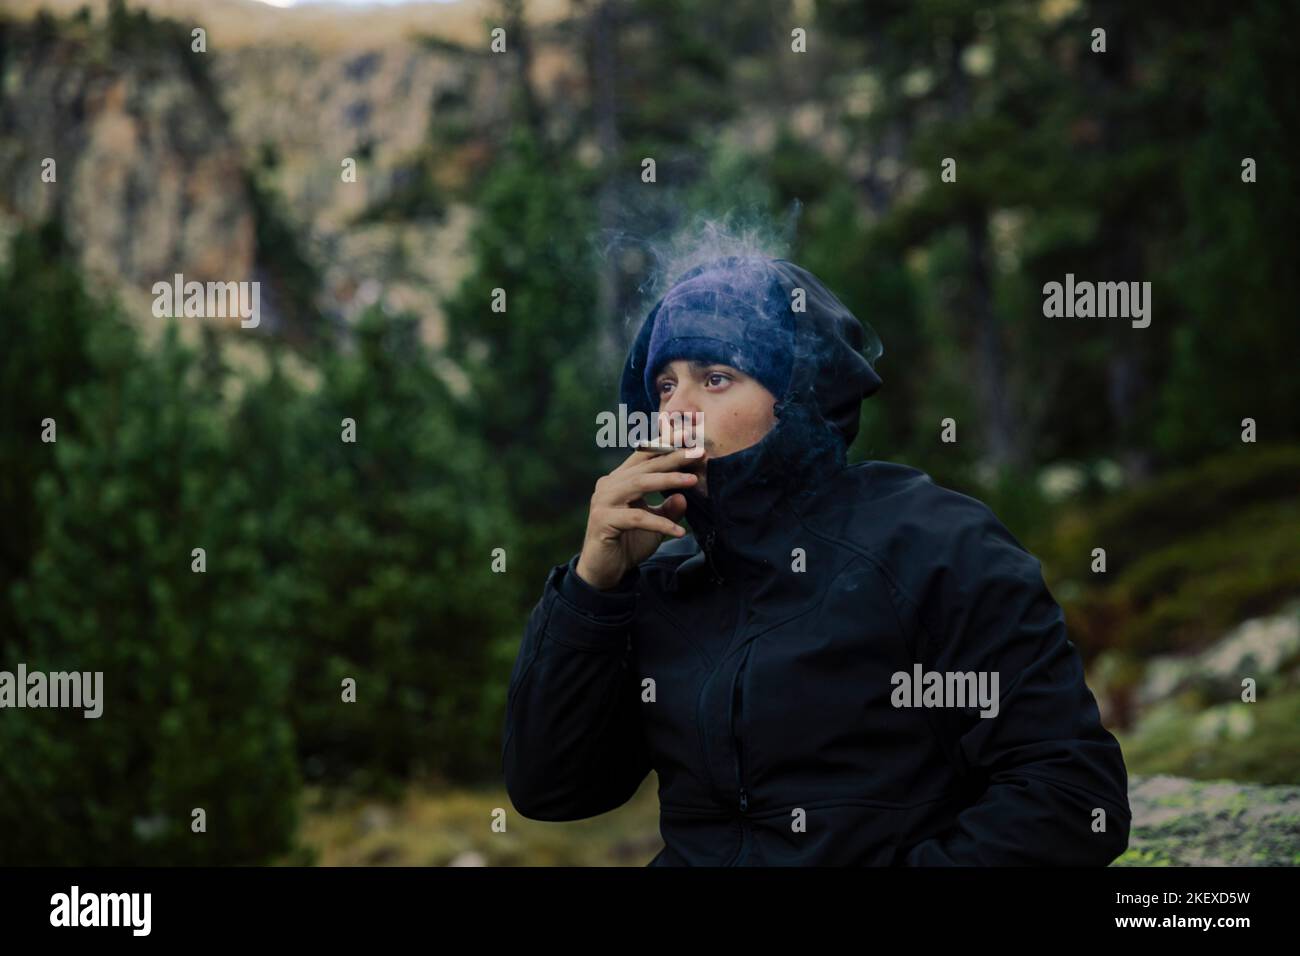 Boy with coat and hat smoking a marijuana cigarette in nature Stock Photo